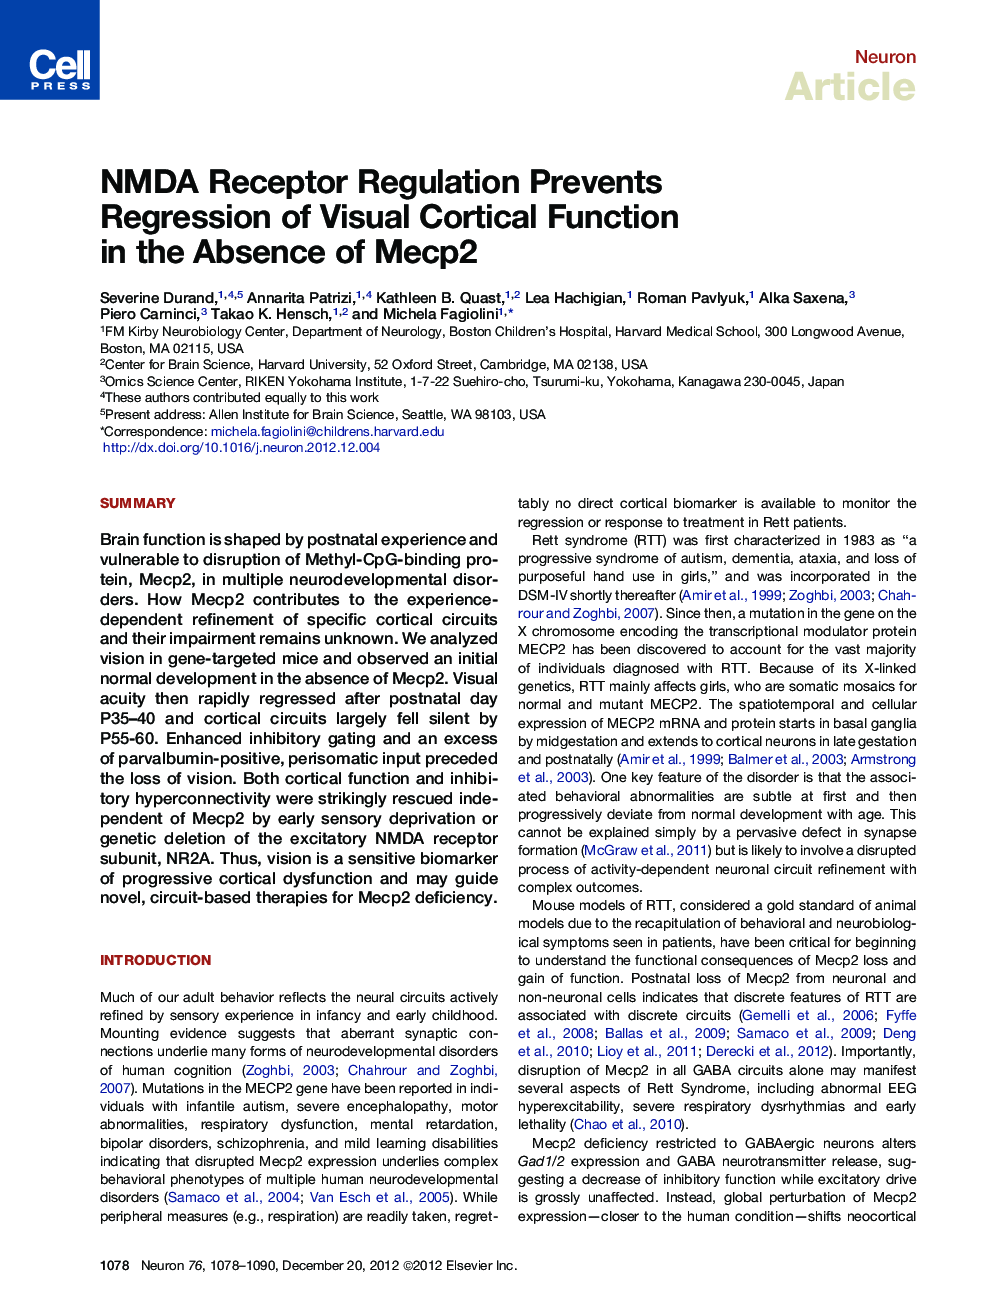 NMDA Receptor Regulation Prevents Regression of Visual Cortical Function in the Absence of Mecp2